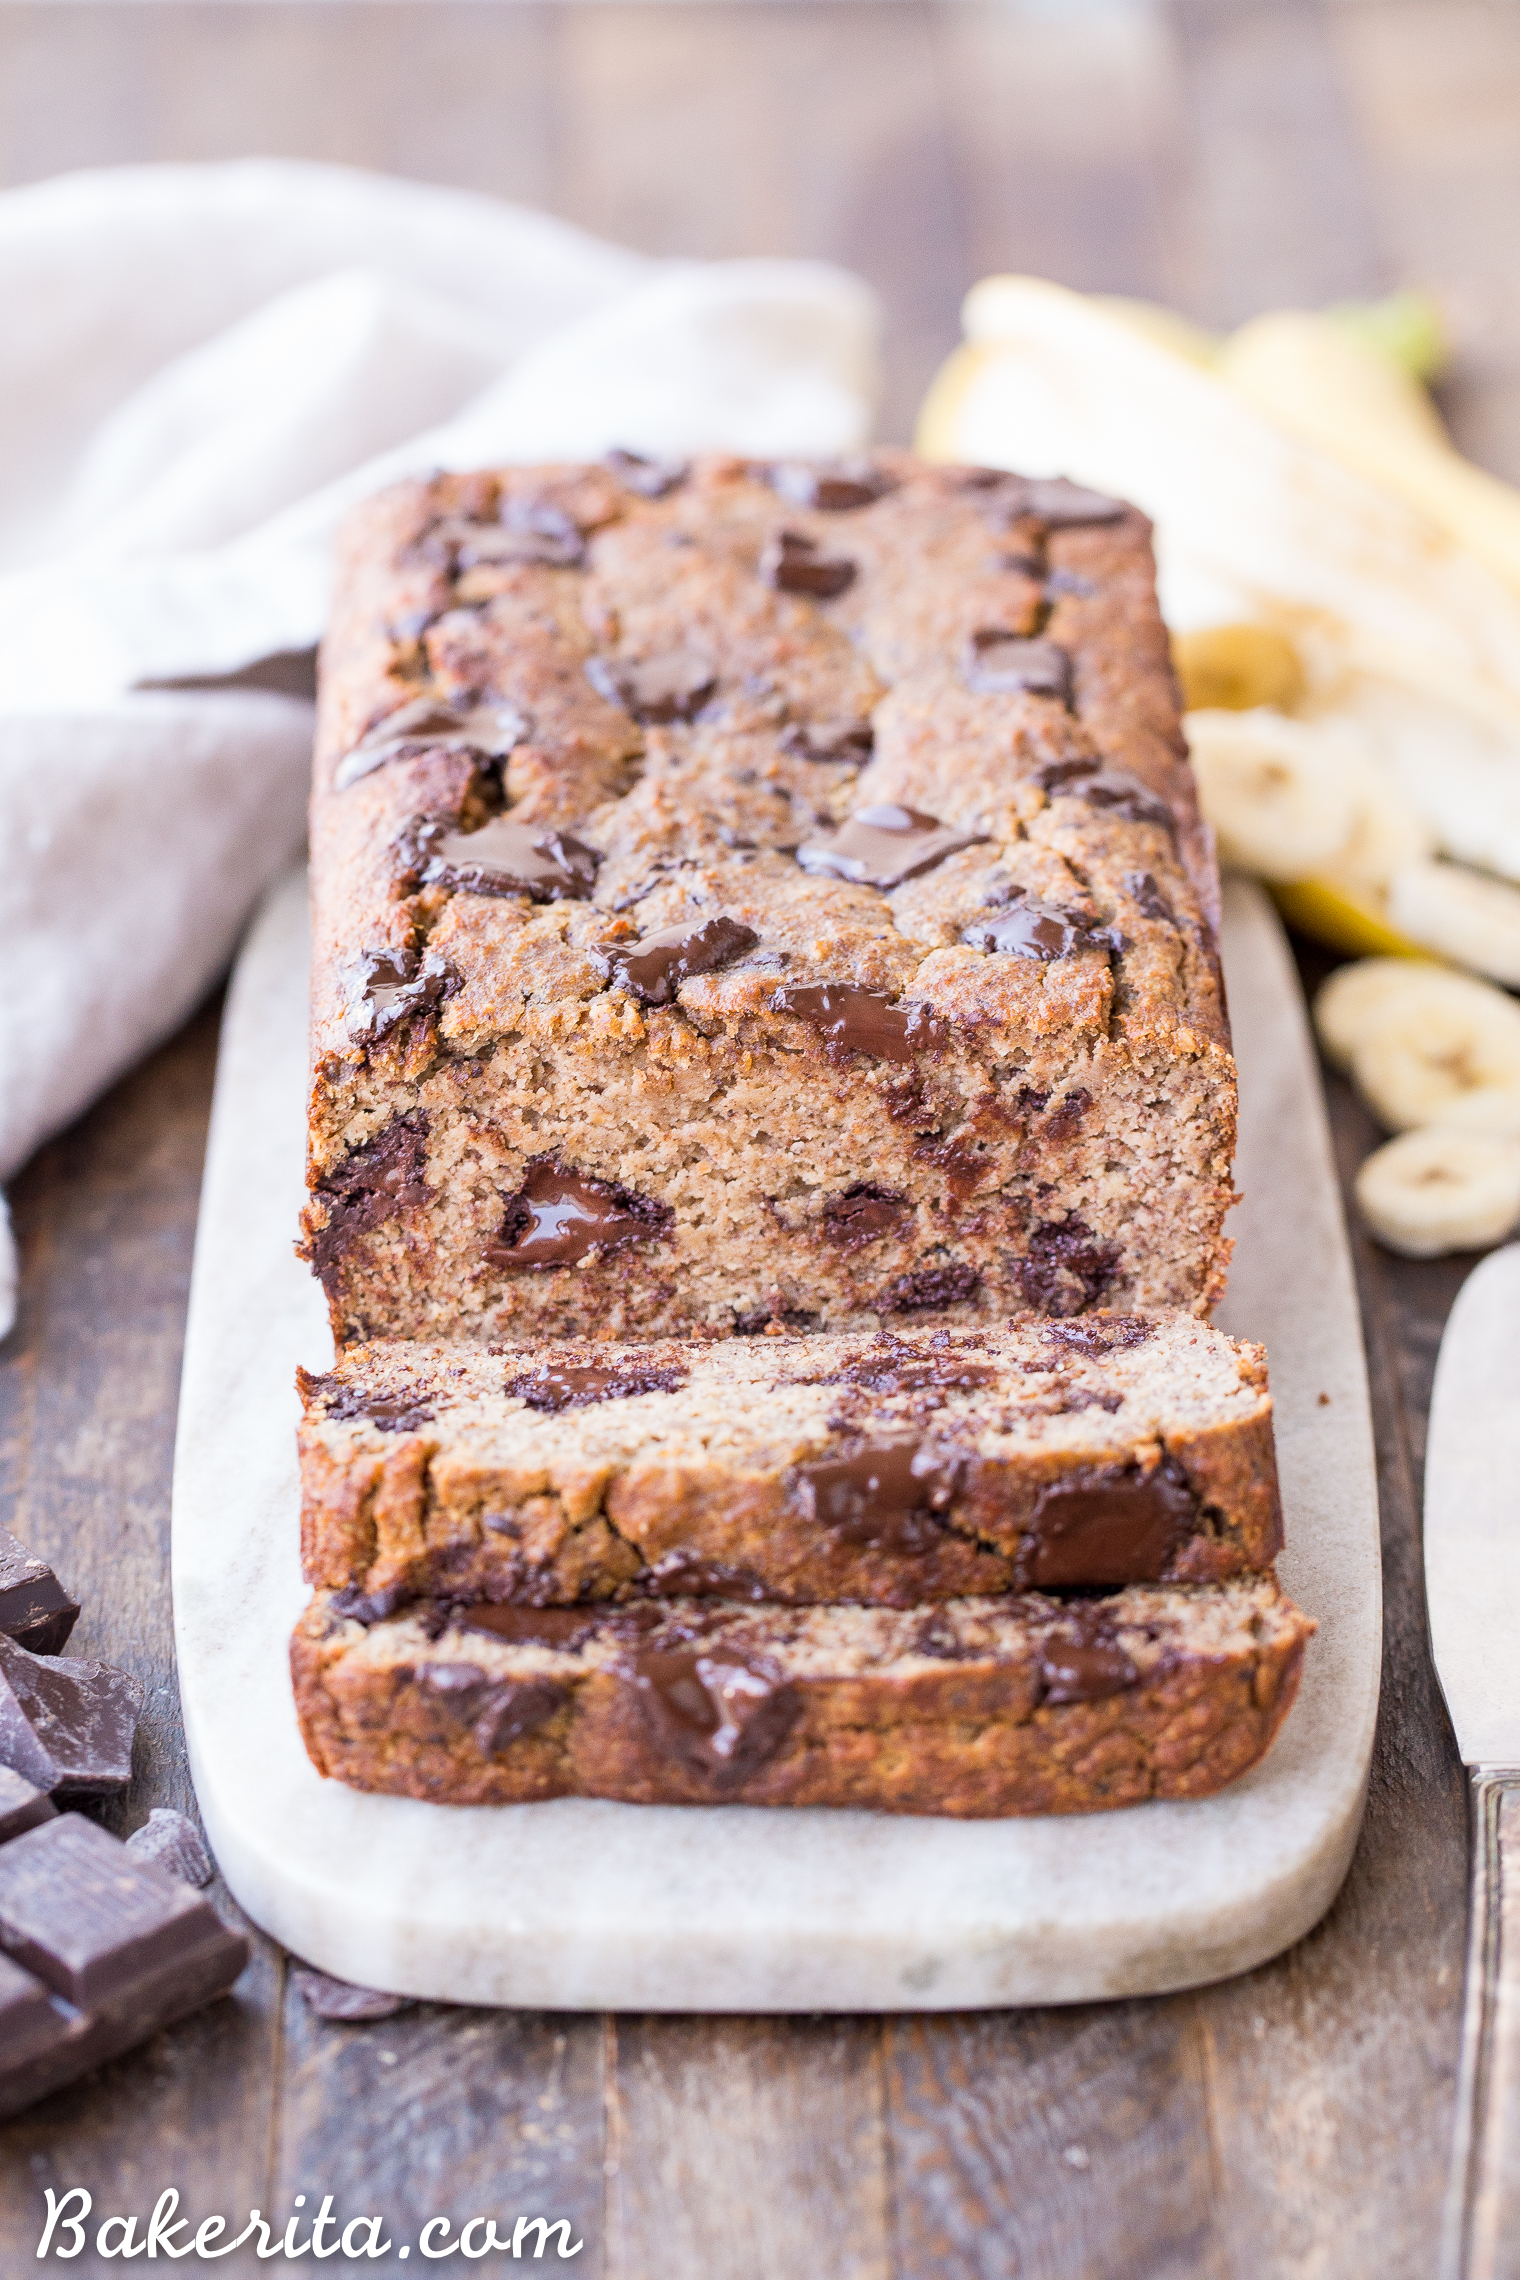 This Paleo Chocolate Chunk Banana Bread is sweetened only with bananas for a guiltless treat that tastes just like traditional banana bread! This is easy recipe you'll come back to again and again. This paleo banana bread is also gluten-free, grain free, and sugar-free.